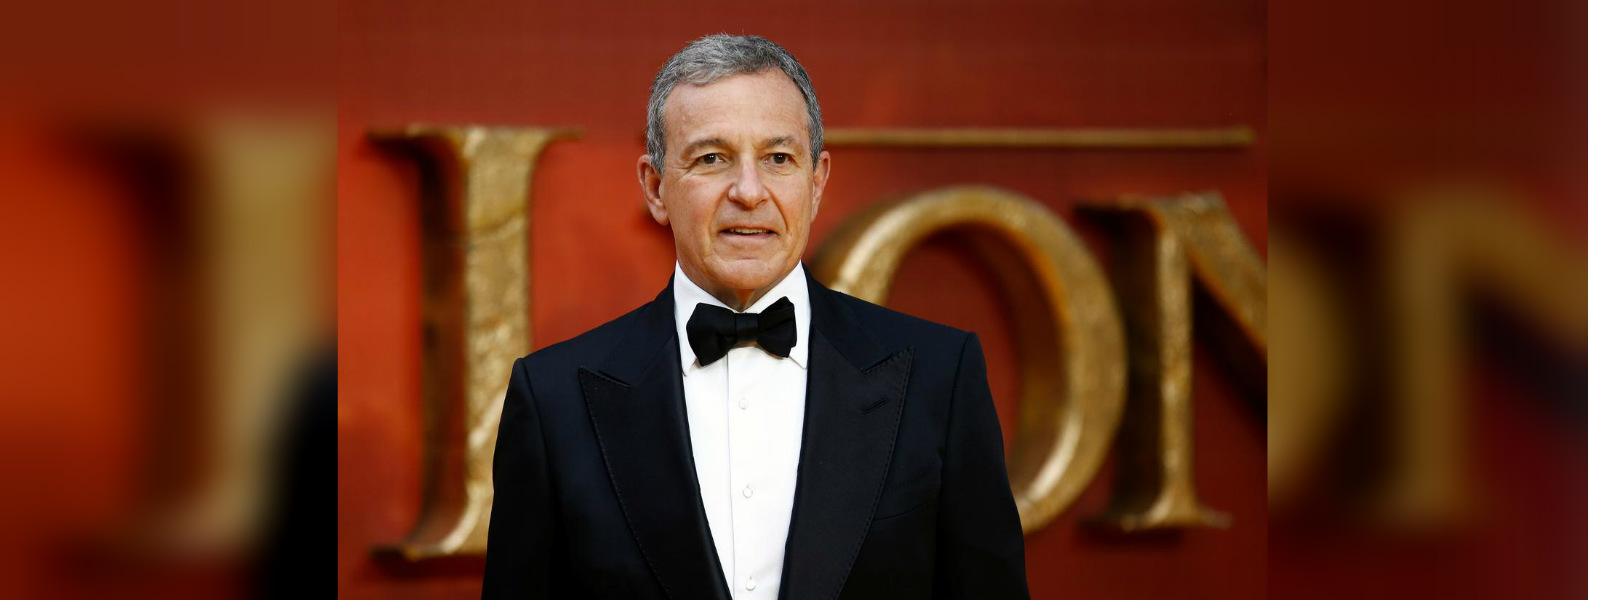 Disney CEO Bob Iger resigns from Apple board as TV battle looms